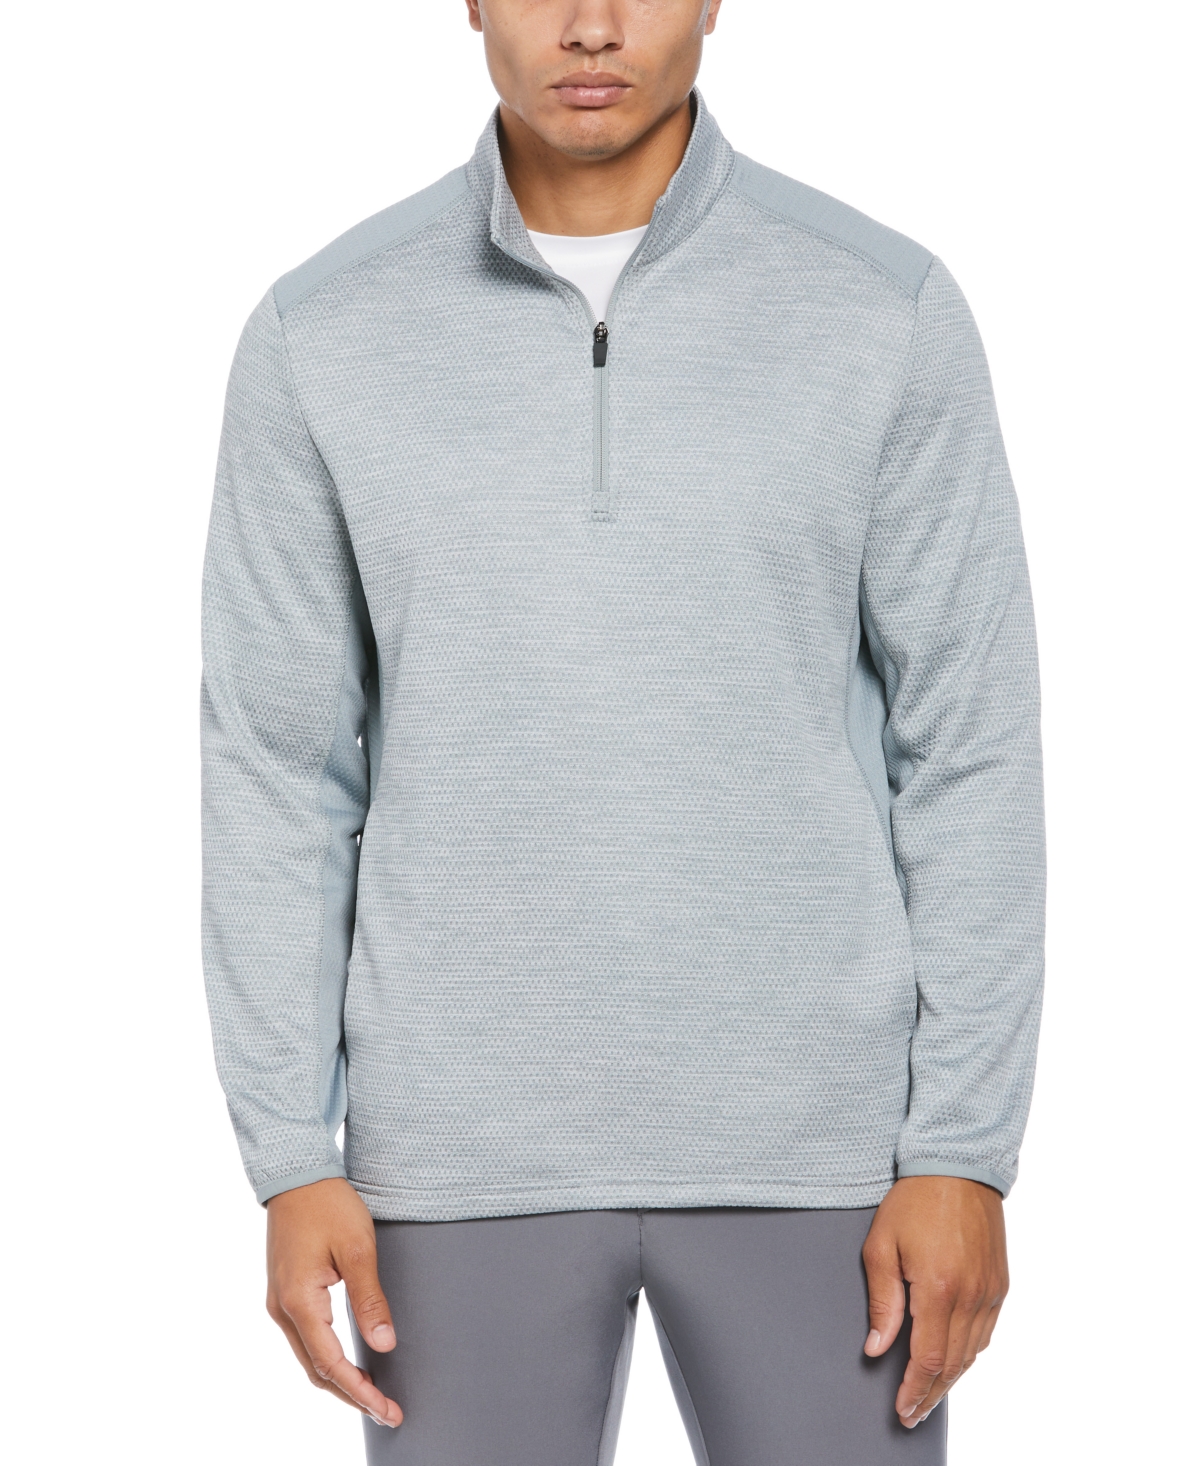 Men's Two-Tone Space-Dyed Quarter-Zip Golf Pullover - Peacoat Heather